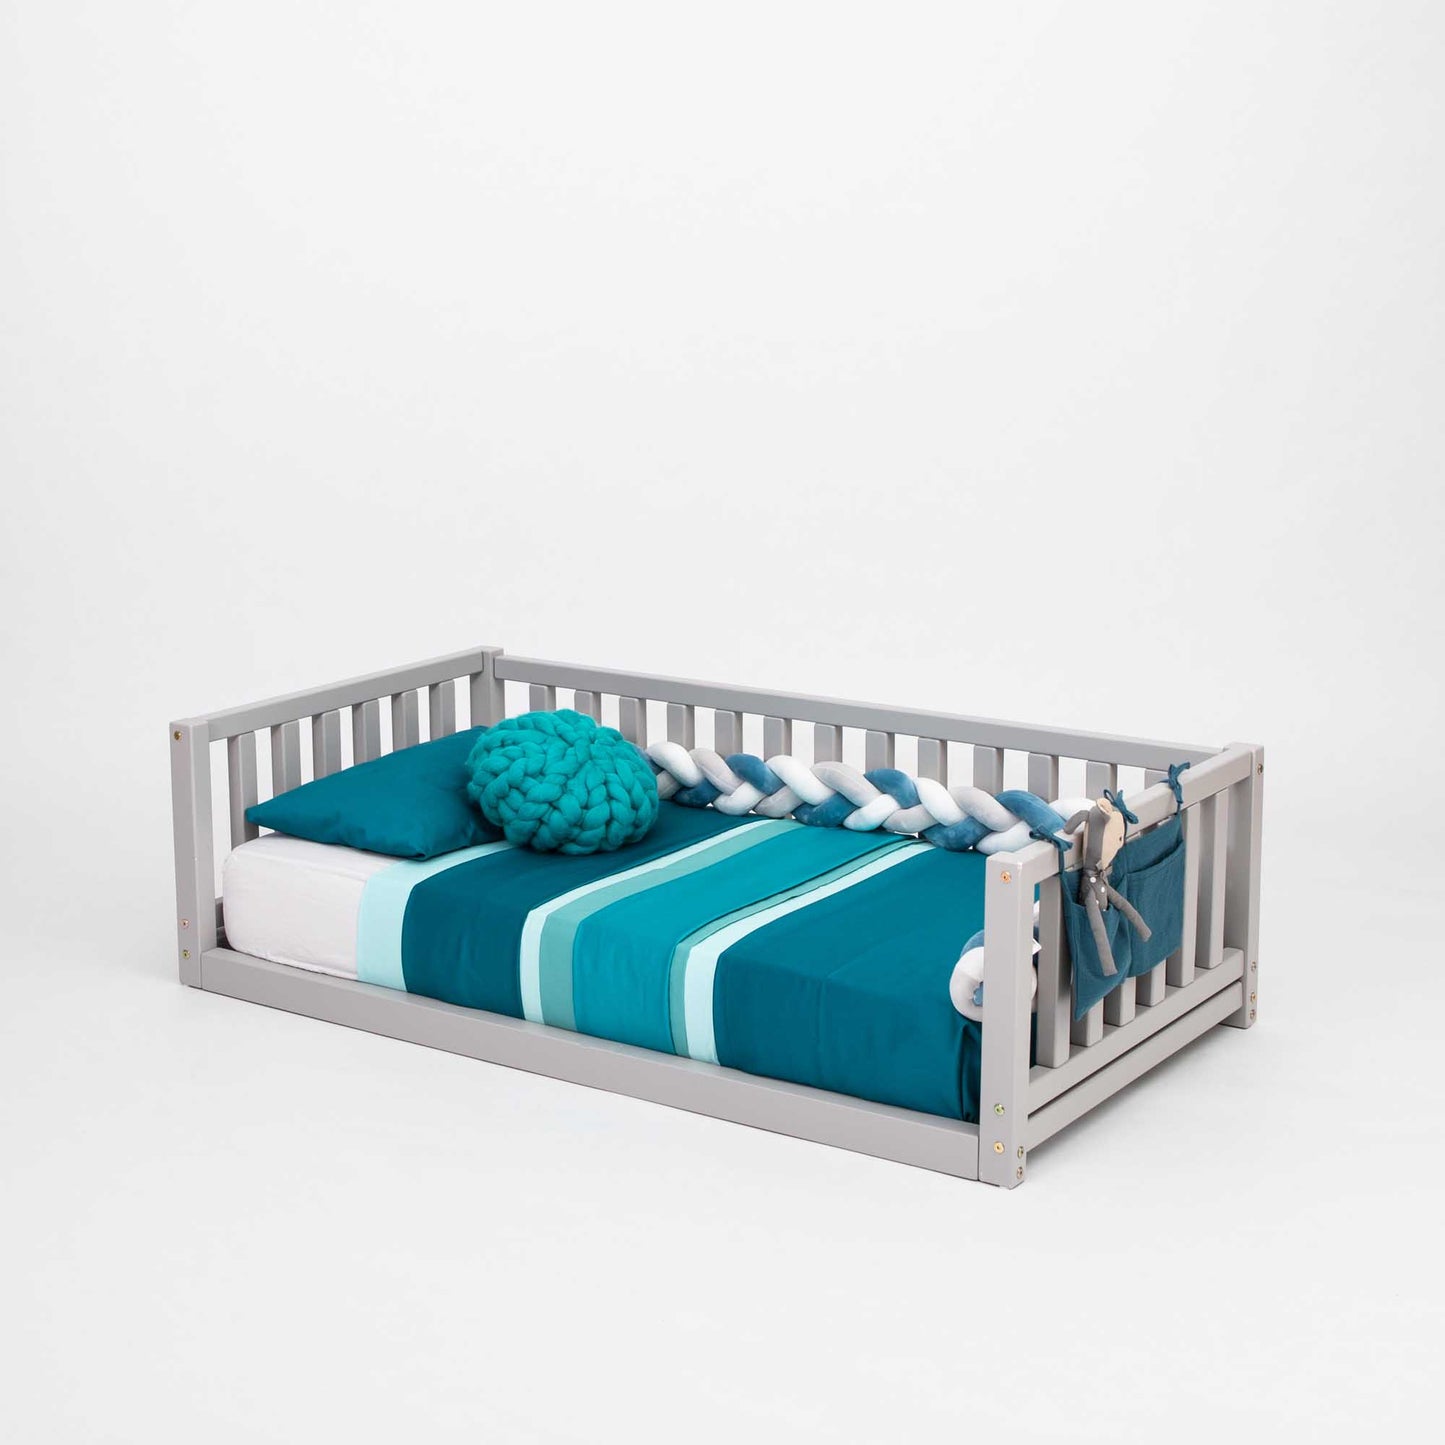 A Montessori bed with 3-sided rails, perfect for boys, from the brand Sweet Home From Wood.